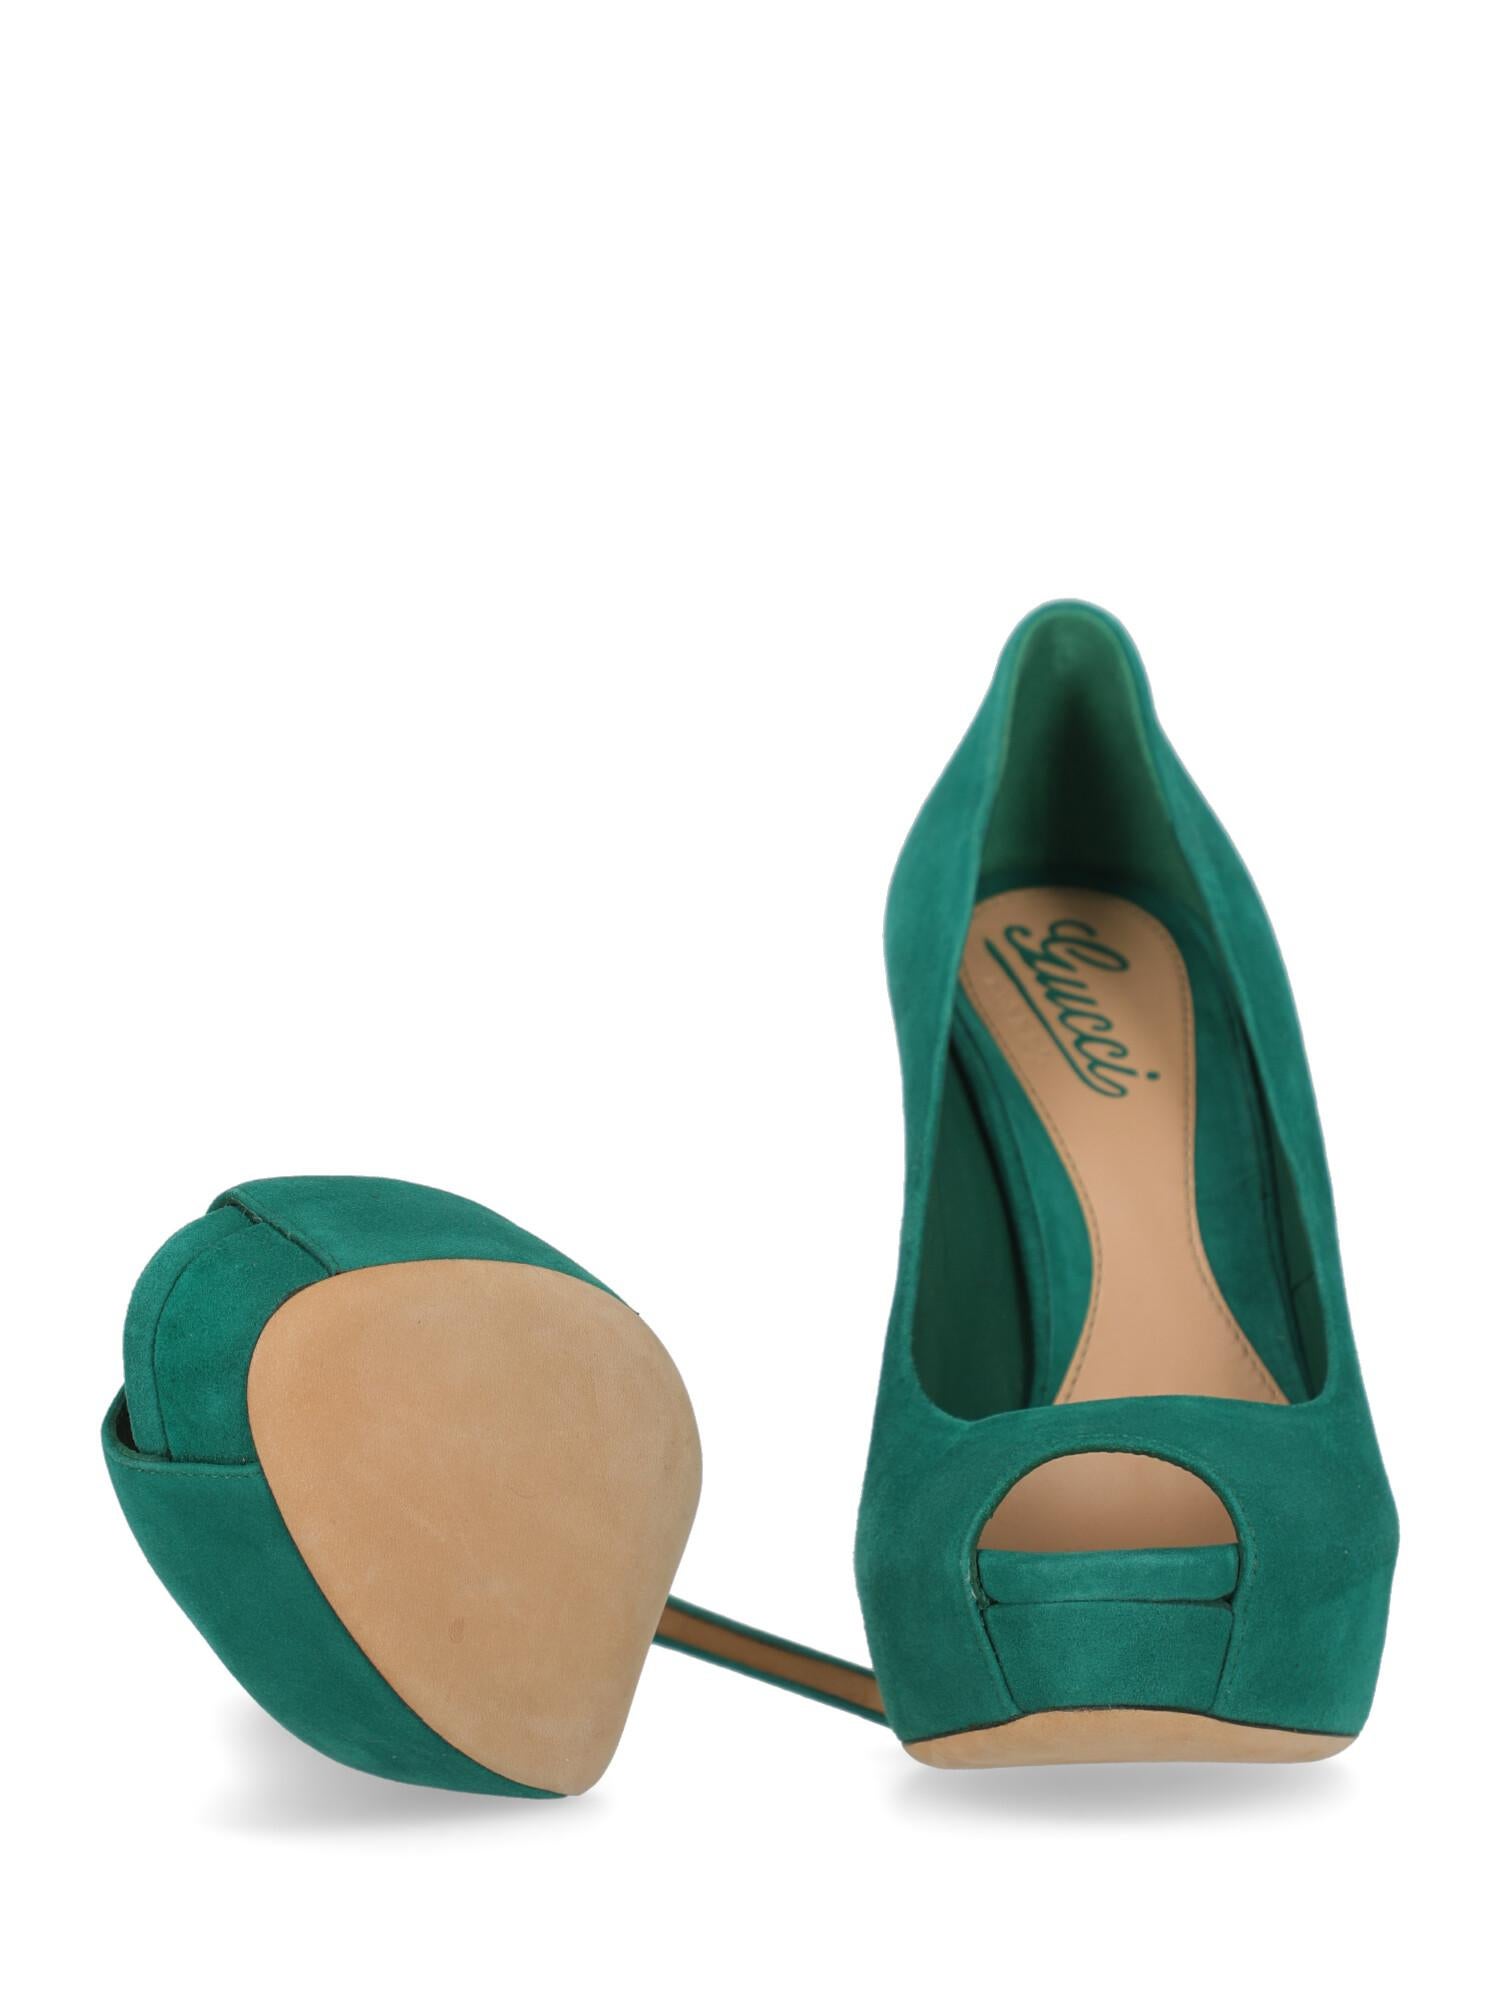 Gucci Woman Pumps Green Leather IT 36.5 For Sale 1